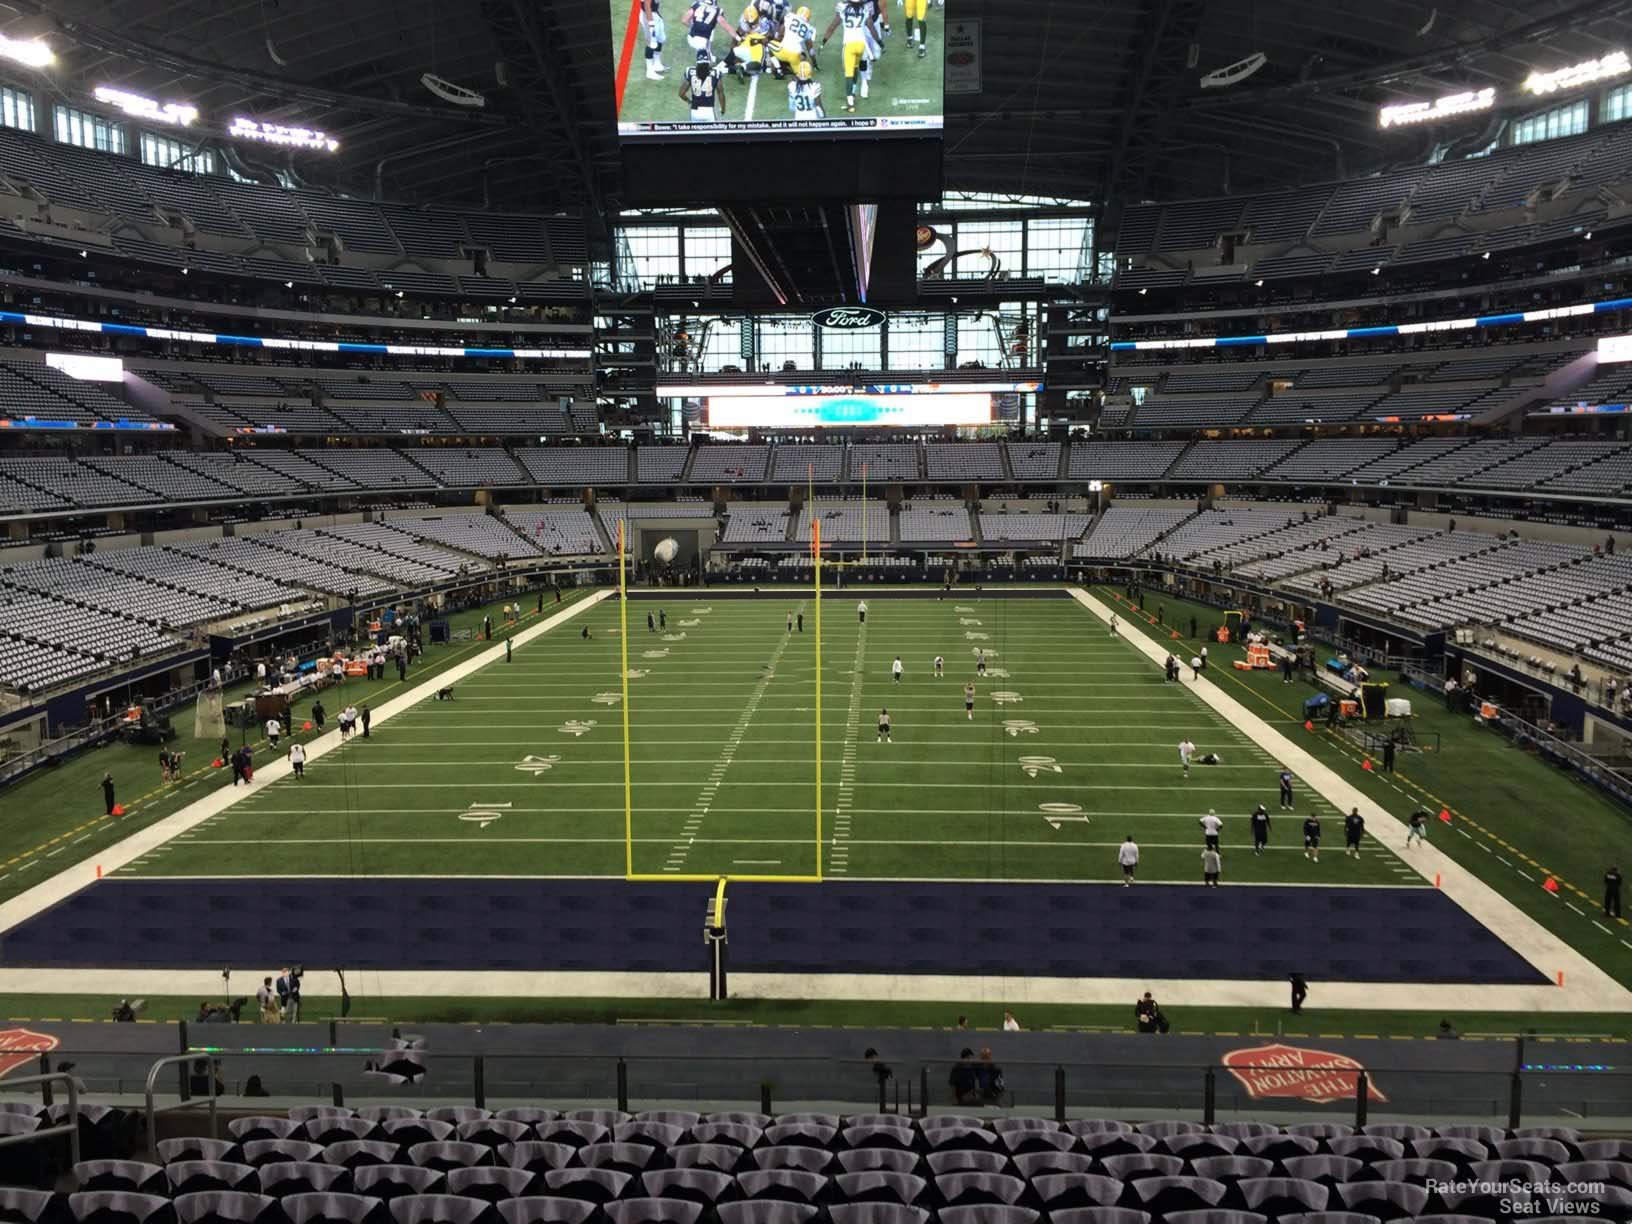 section 222, row 13 seat view  for football - at&t stadium (cowboys stadium)